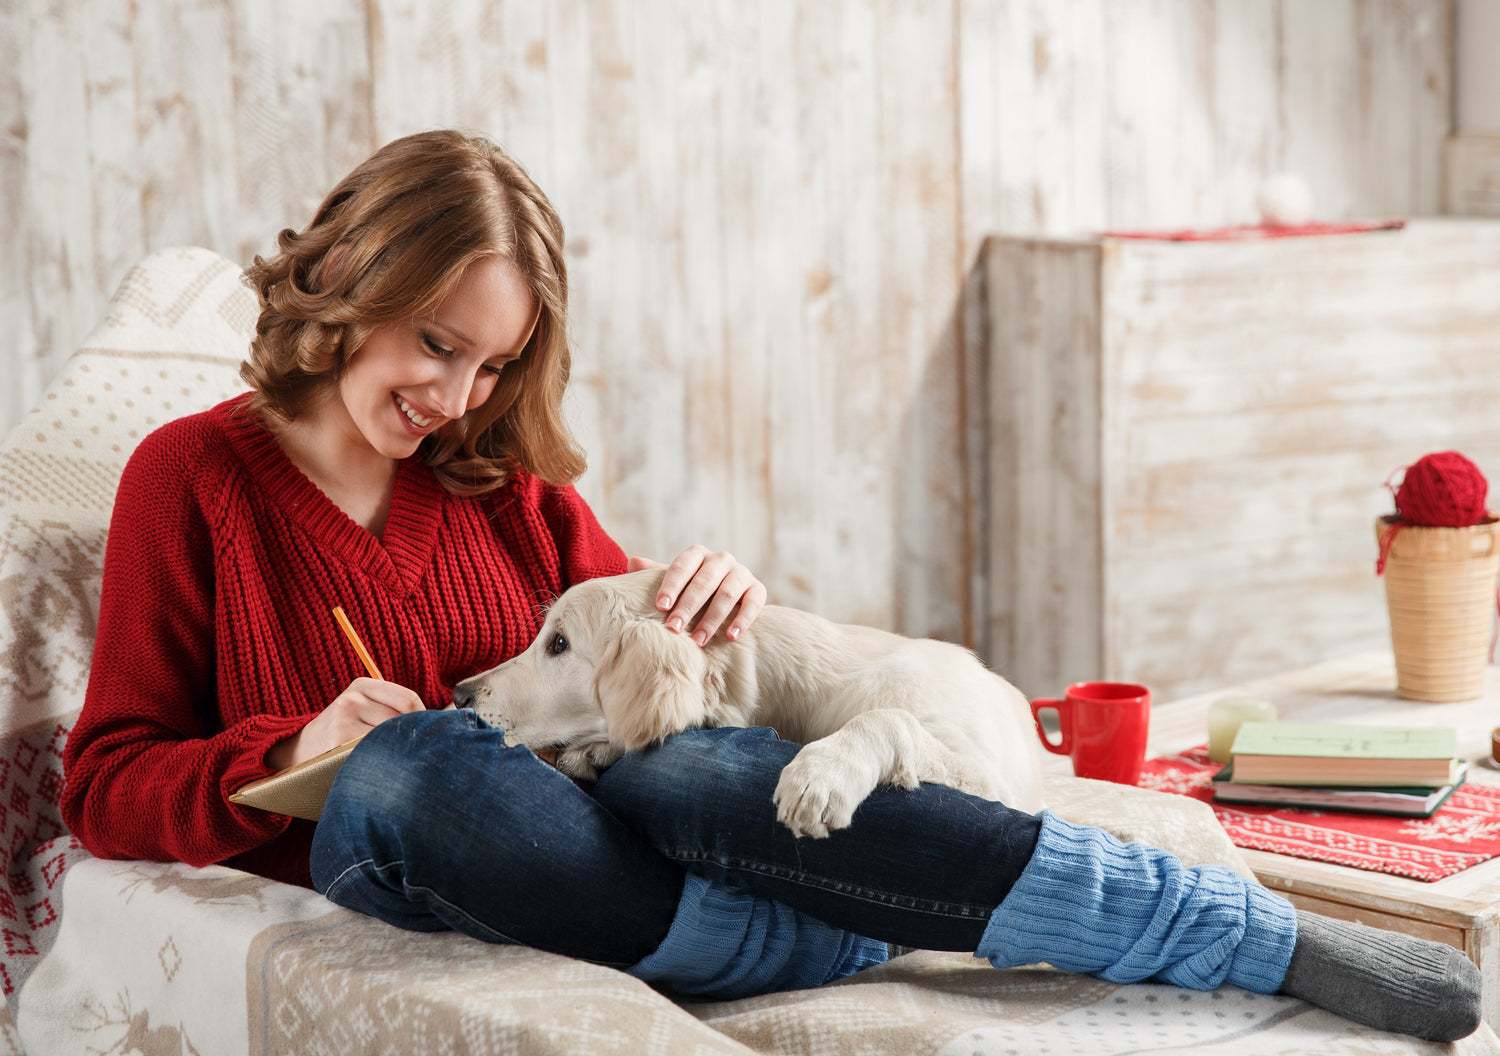 Puppy Love: How Your Pet May Help You Destress